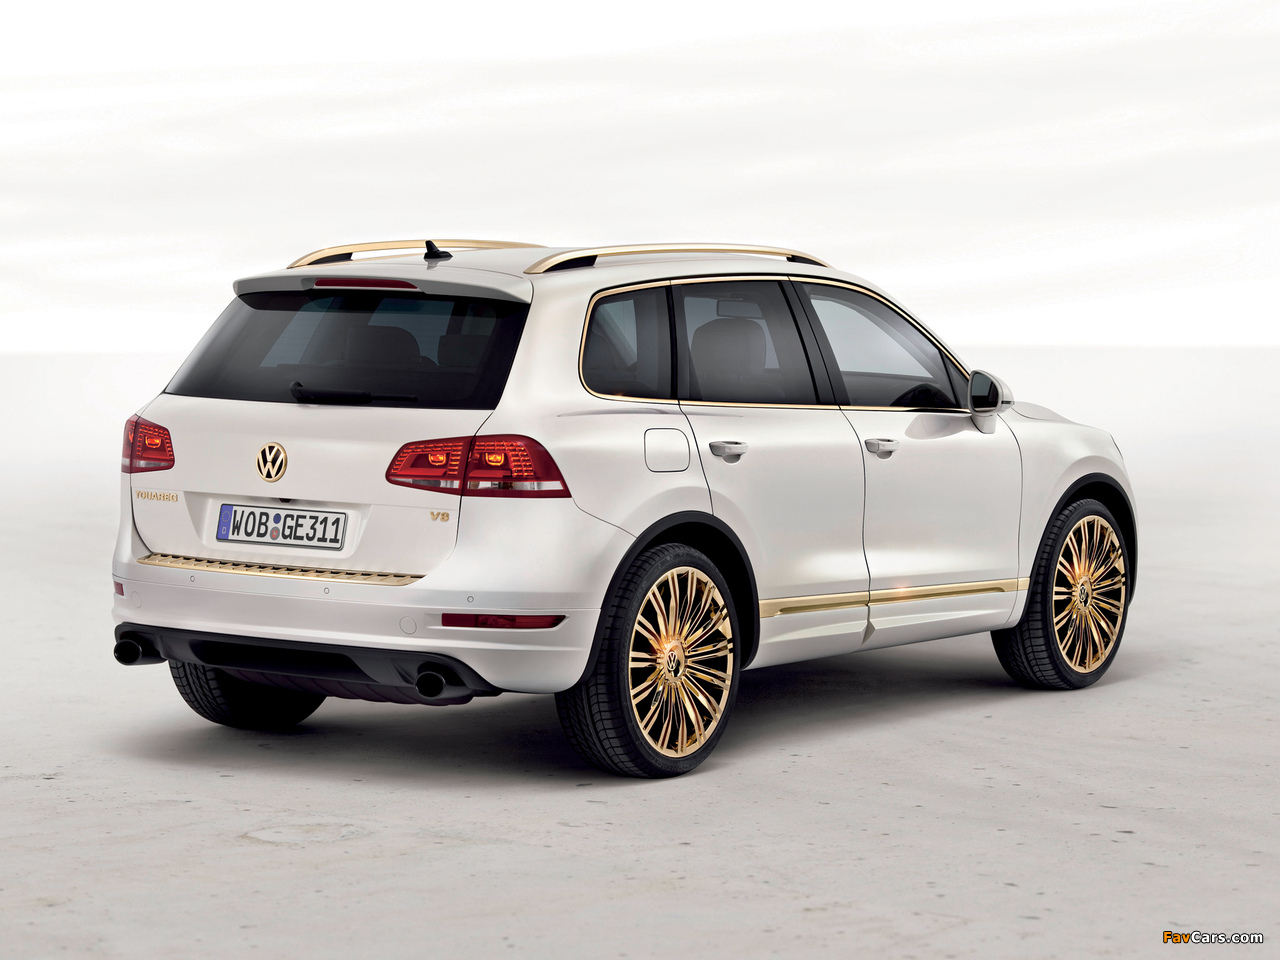 Volkswagen Touareg V8 TDI Gold Edition Concept 2011 pictures (1280 x 960)